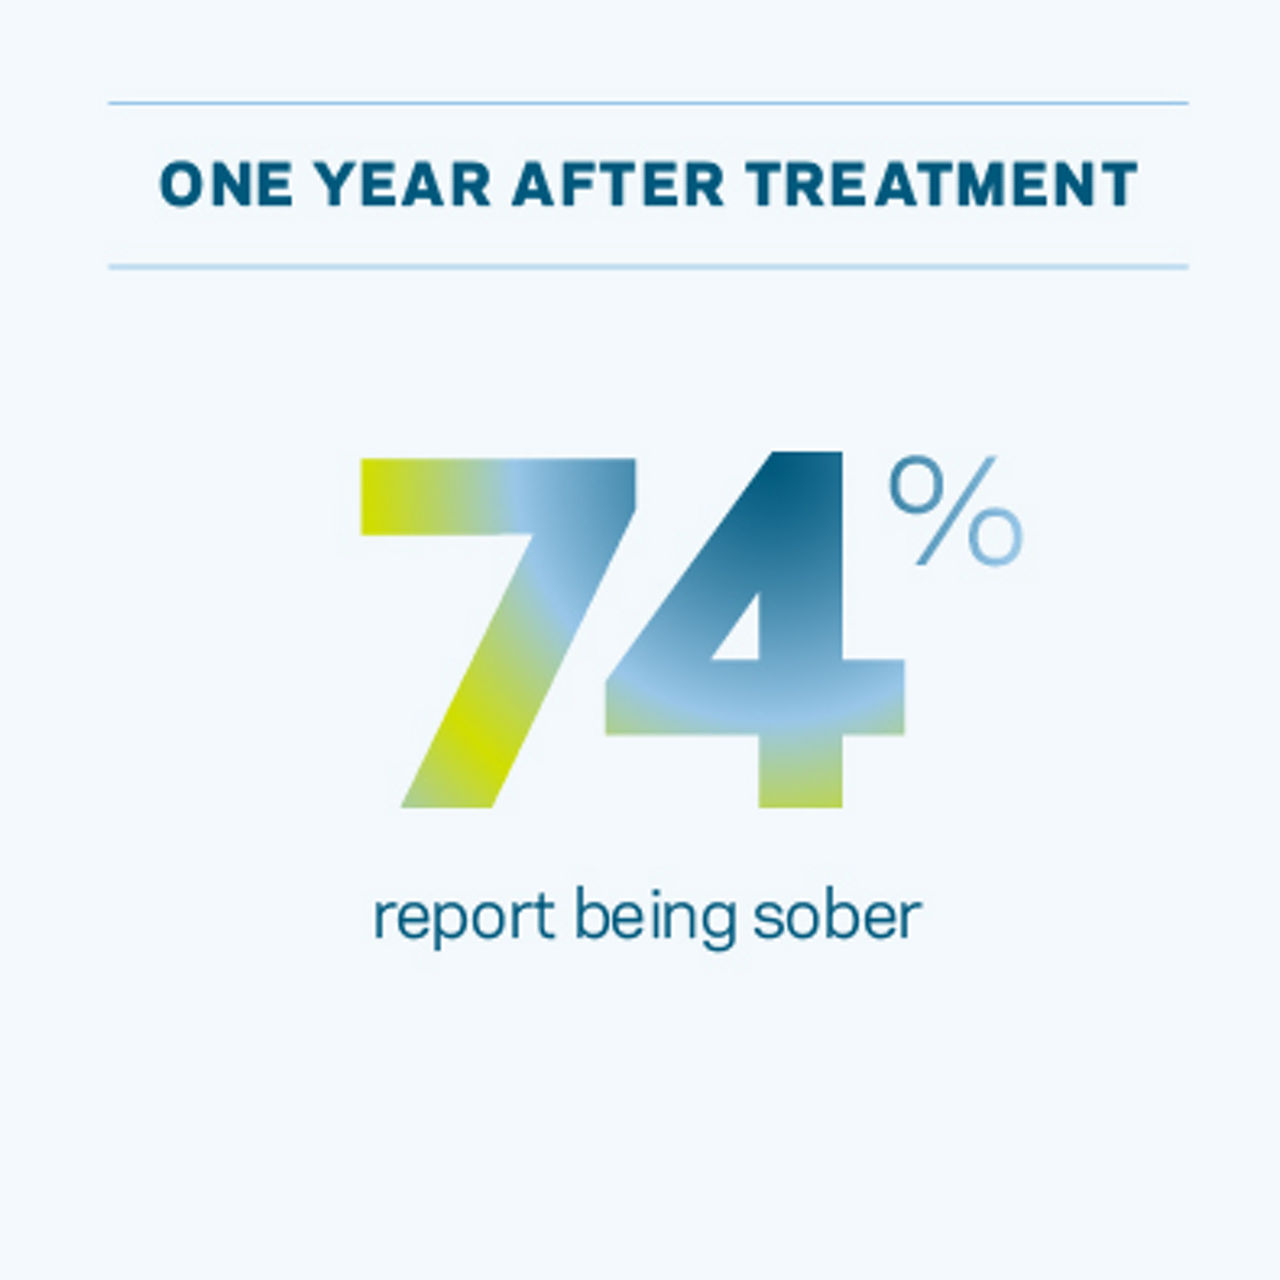 One year after treatment, 74 percent report being sober